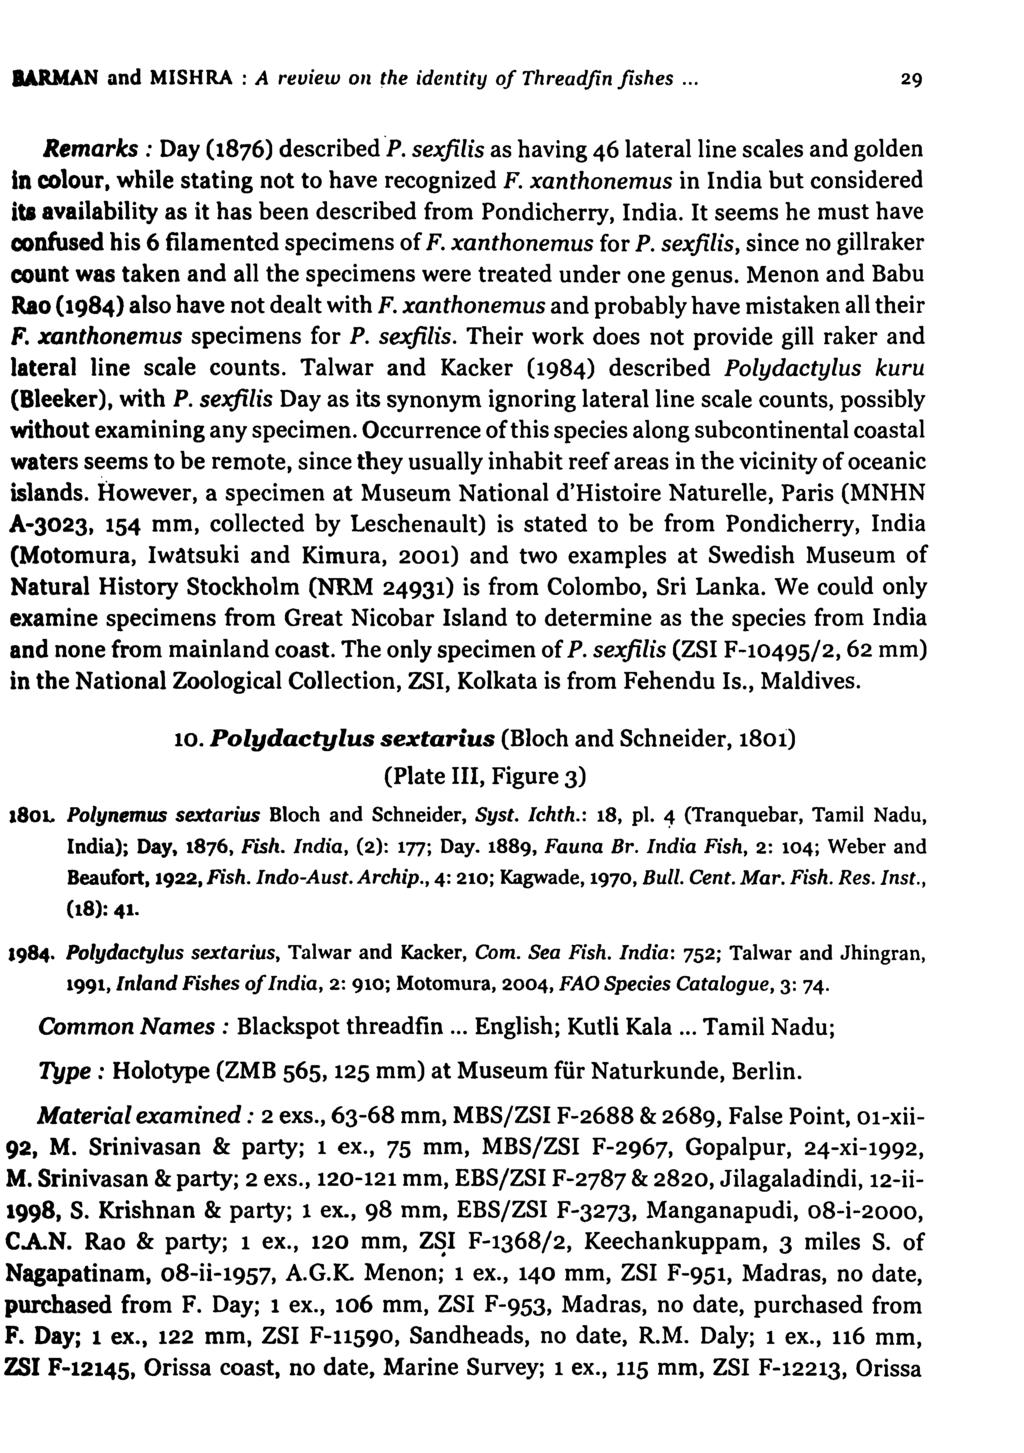 BARMAN and MISHRA : A revielv 011 the identity of Threadfin fishes... 29 Remarks: Day (1876) described P. sexfilis as having 46 lateral line scales and golden in colour.